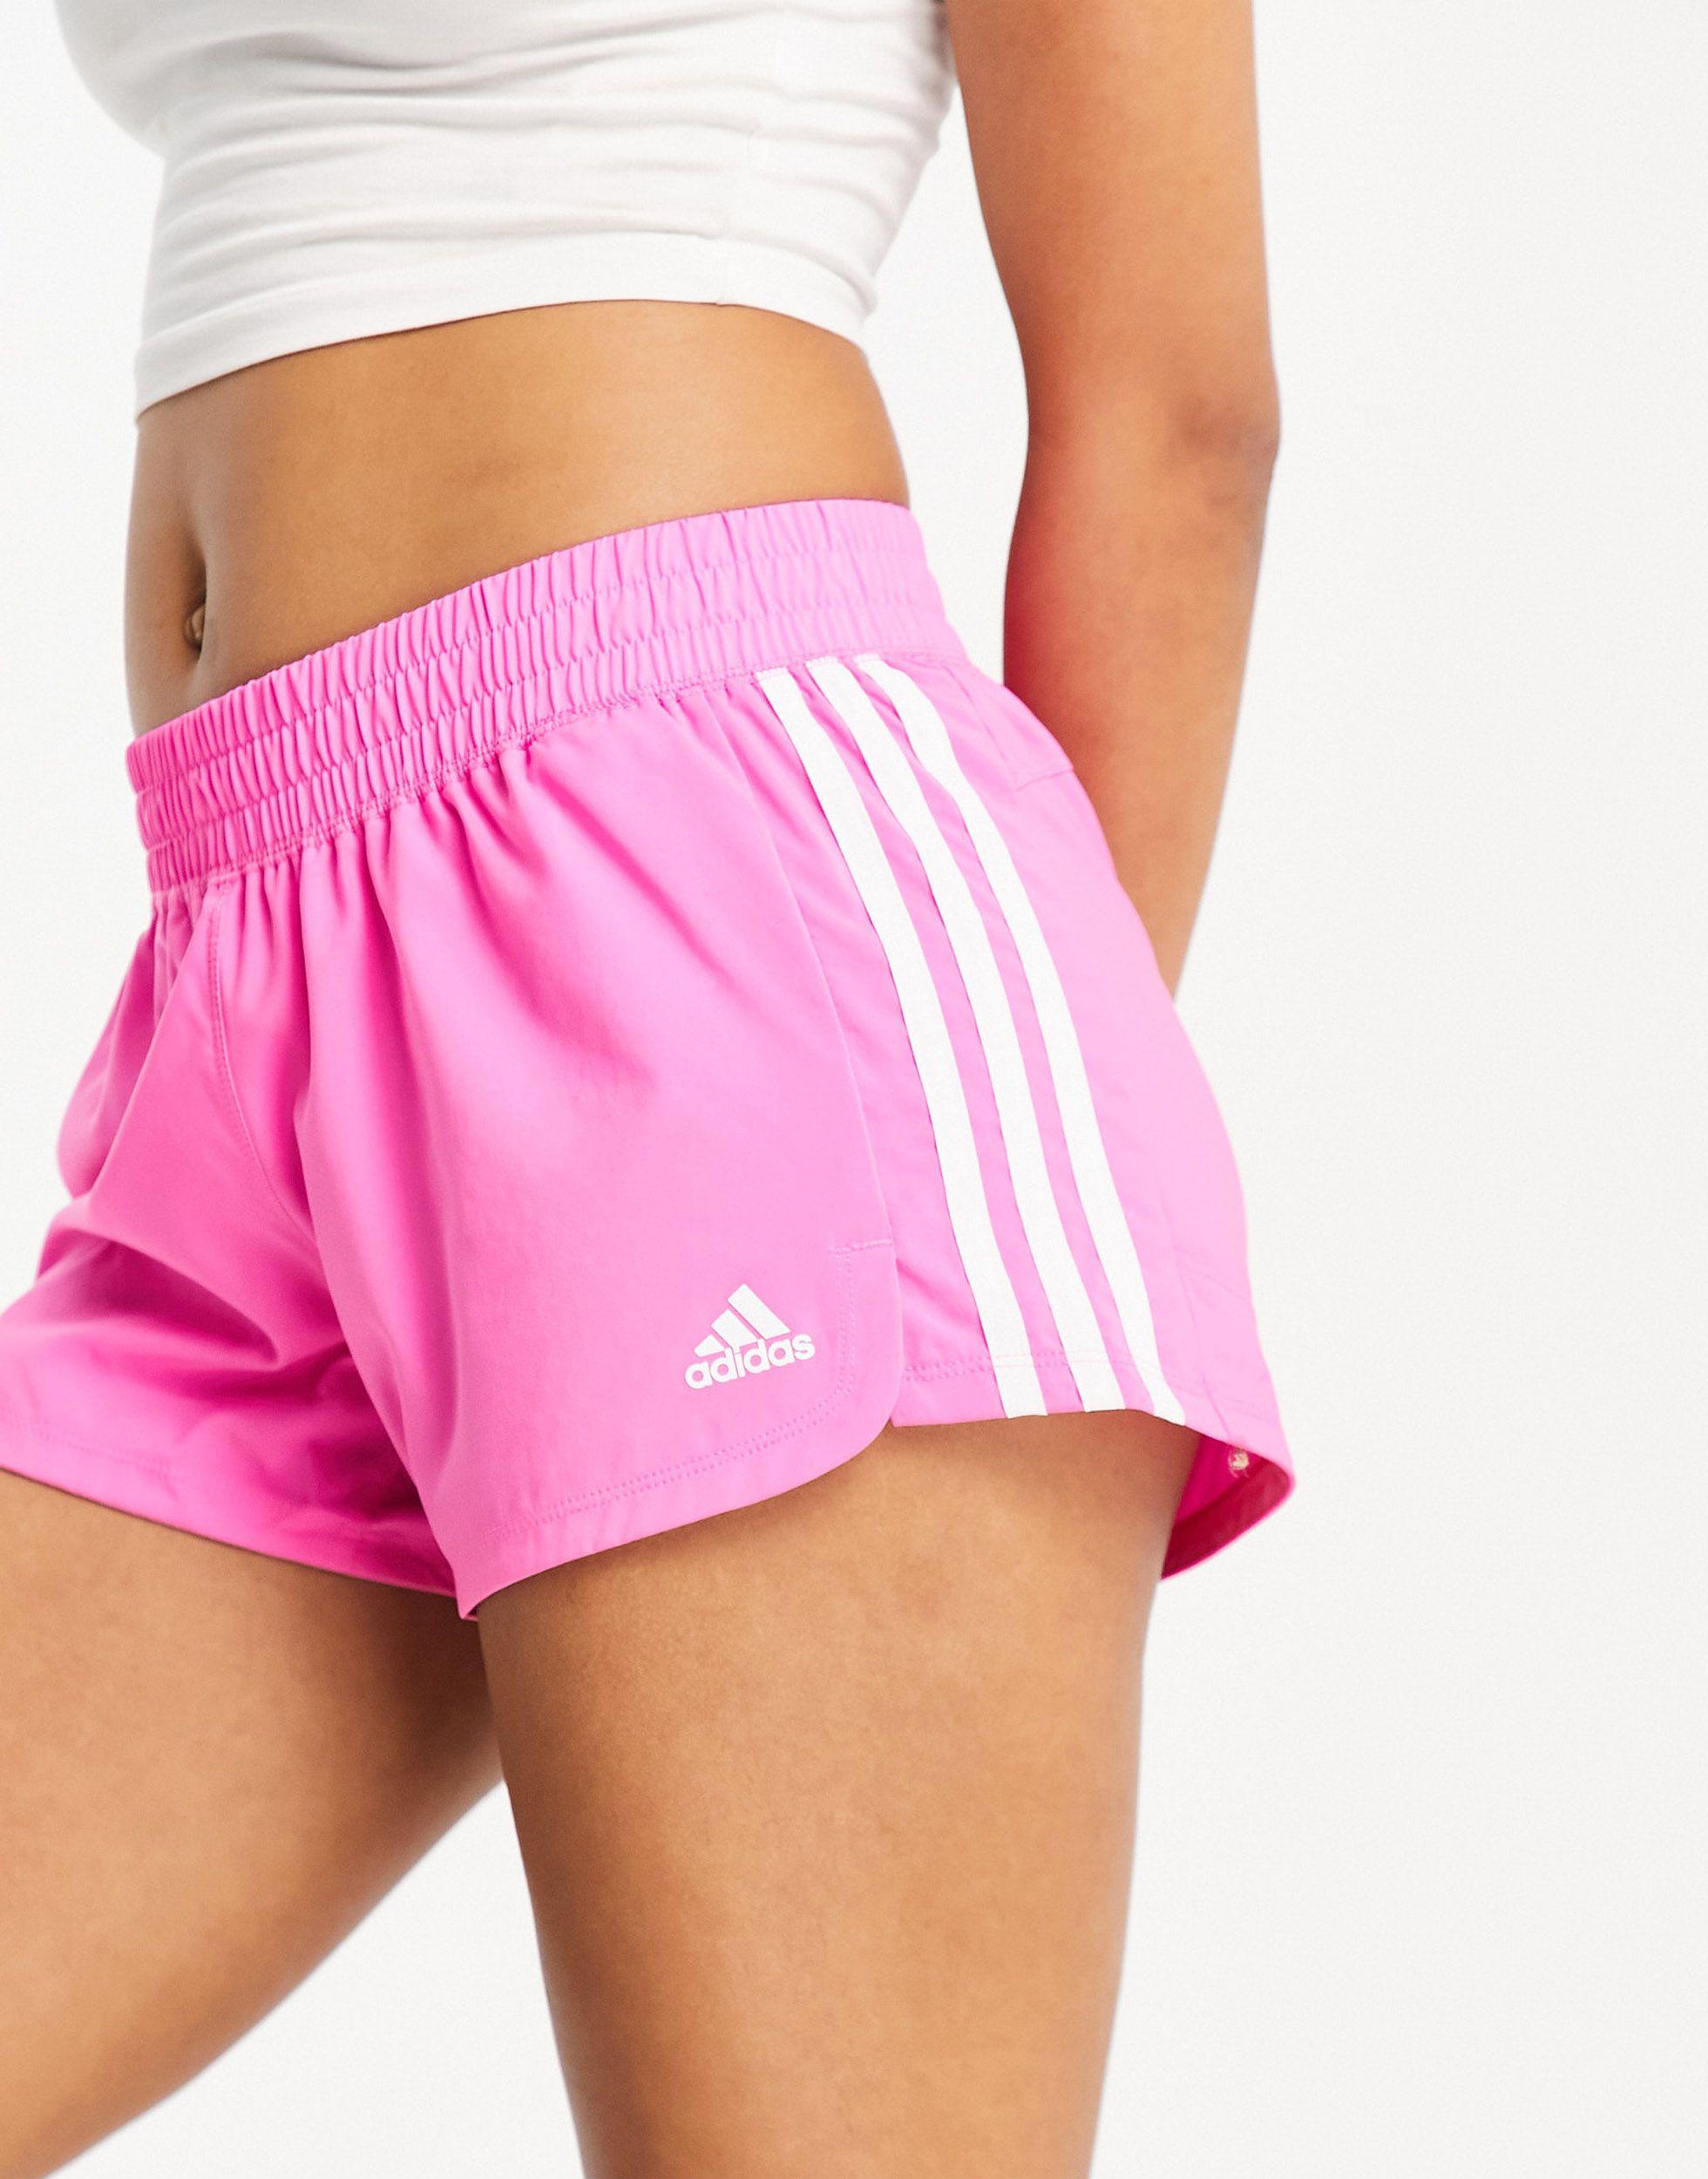 adidas Originals Adidas Training Pacer 3 Stripe Woven Shorts in Pink | Lyst